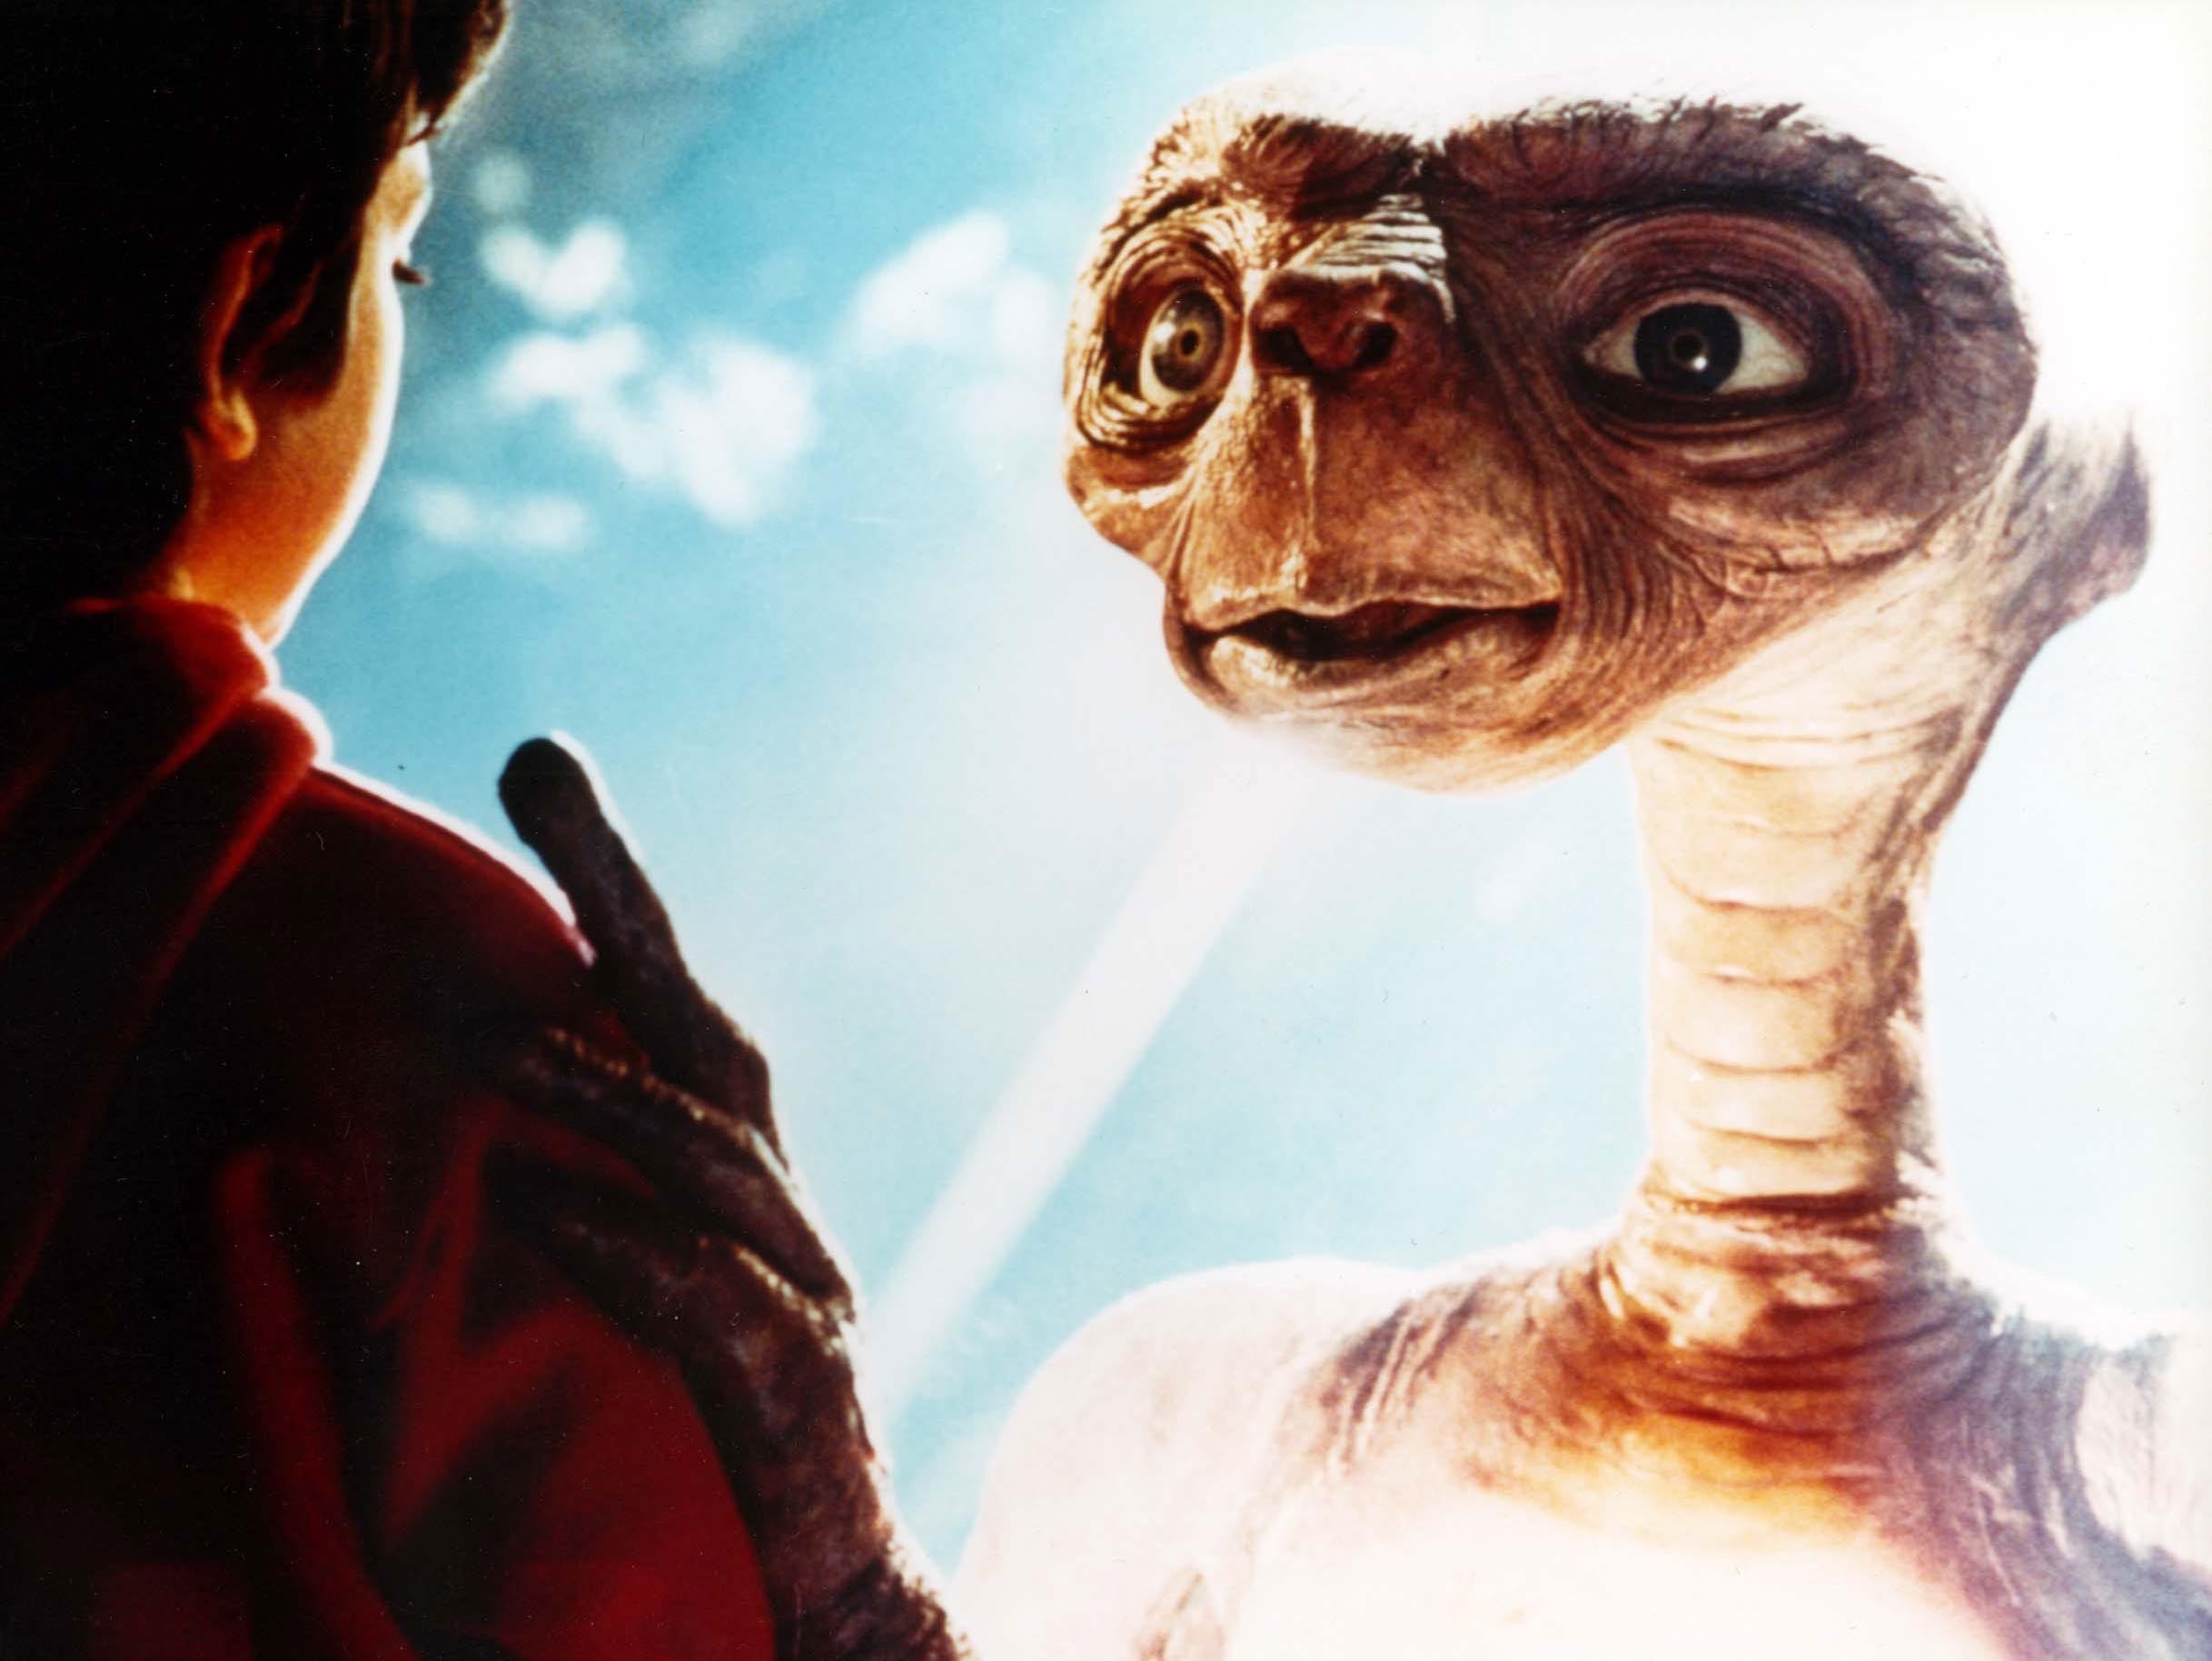 Steven Spielberg's ET set to make millions 40 years after release, Films, Entertainment